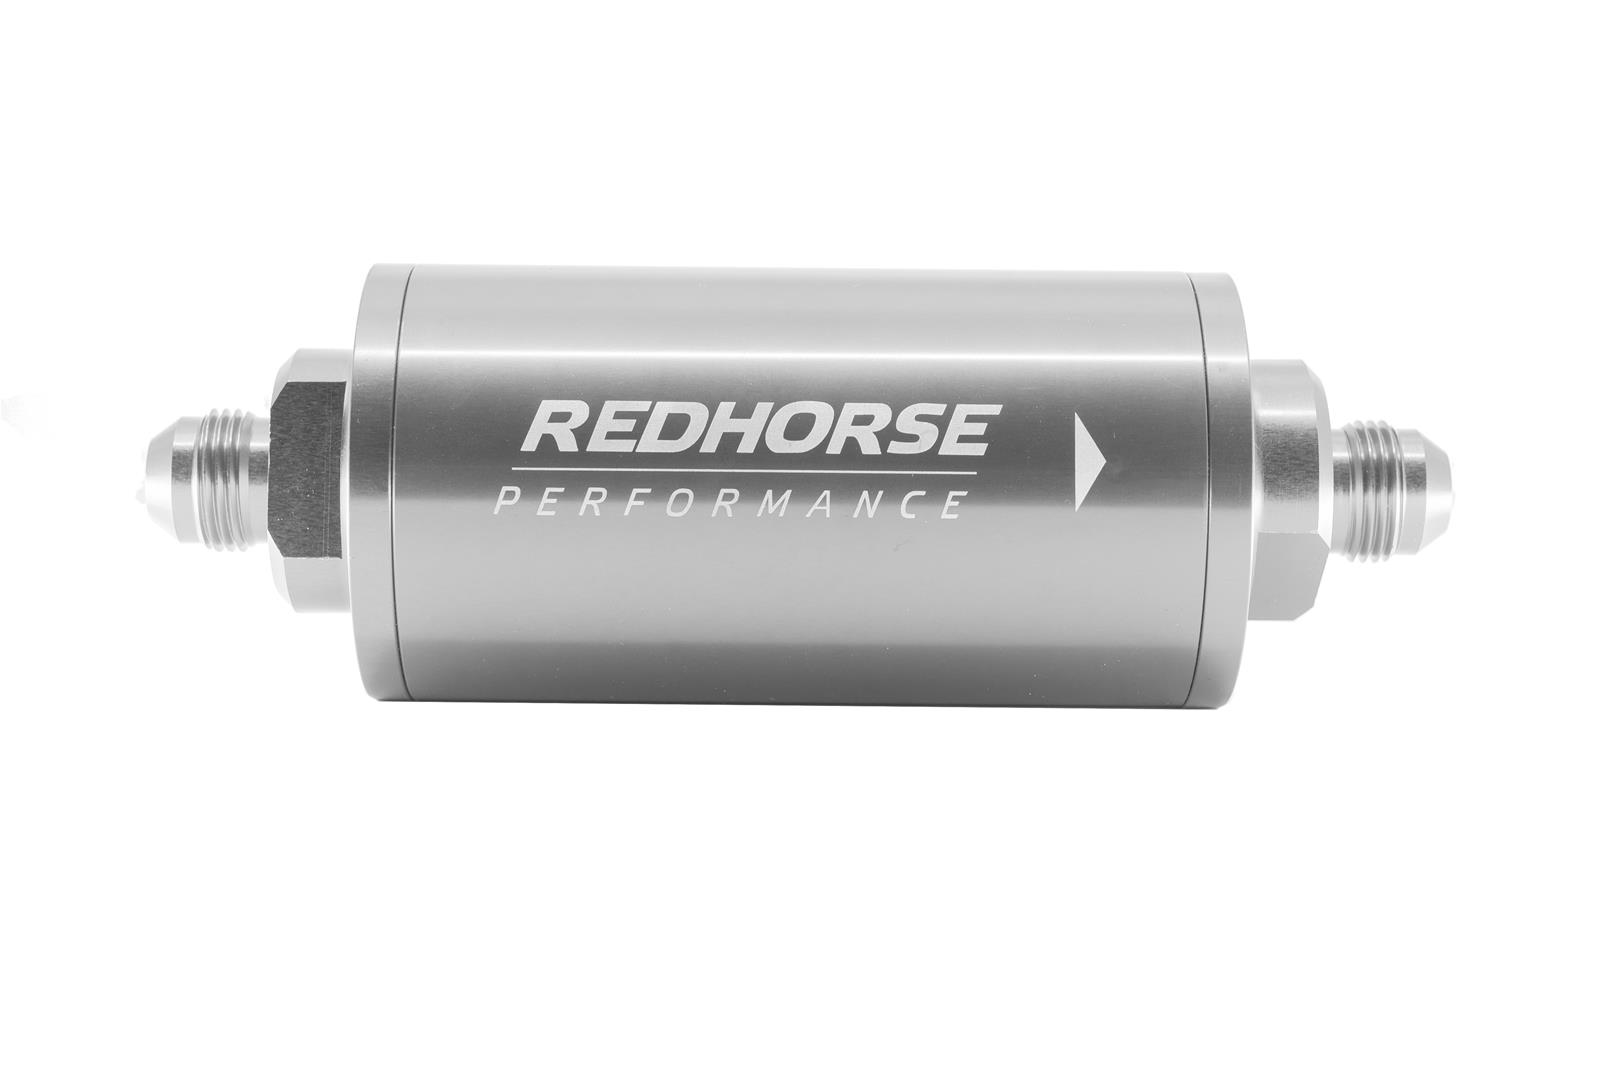 Redhorse Performance 4651-12-5 6in Cylindrical In-Line Race Fuel Filter - 12 AN